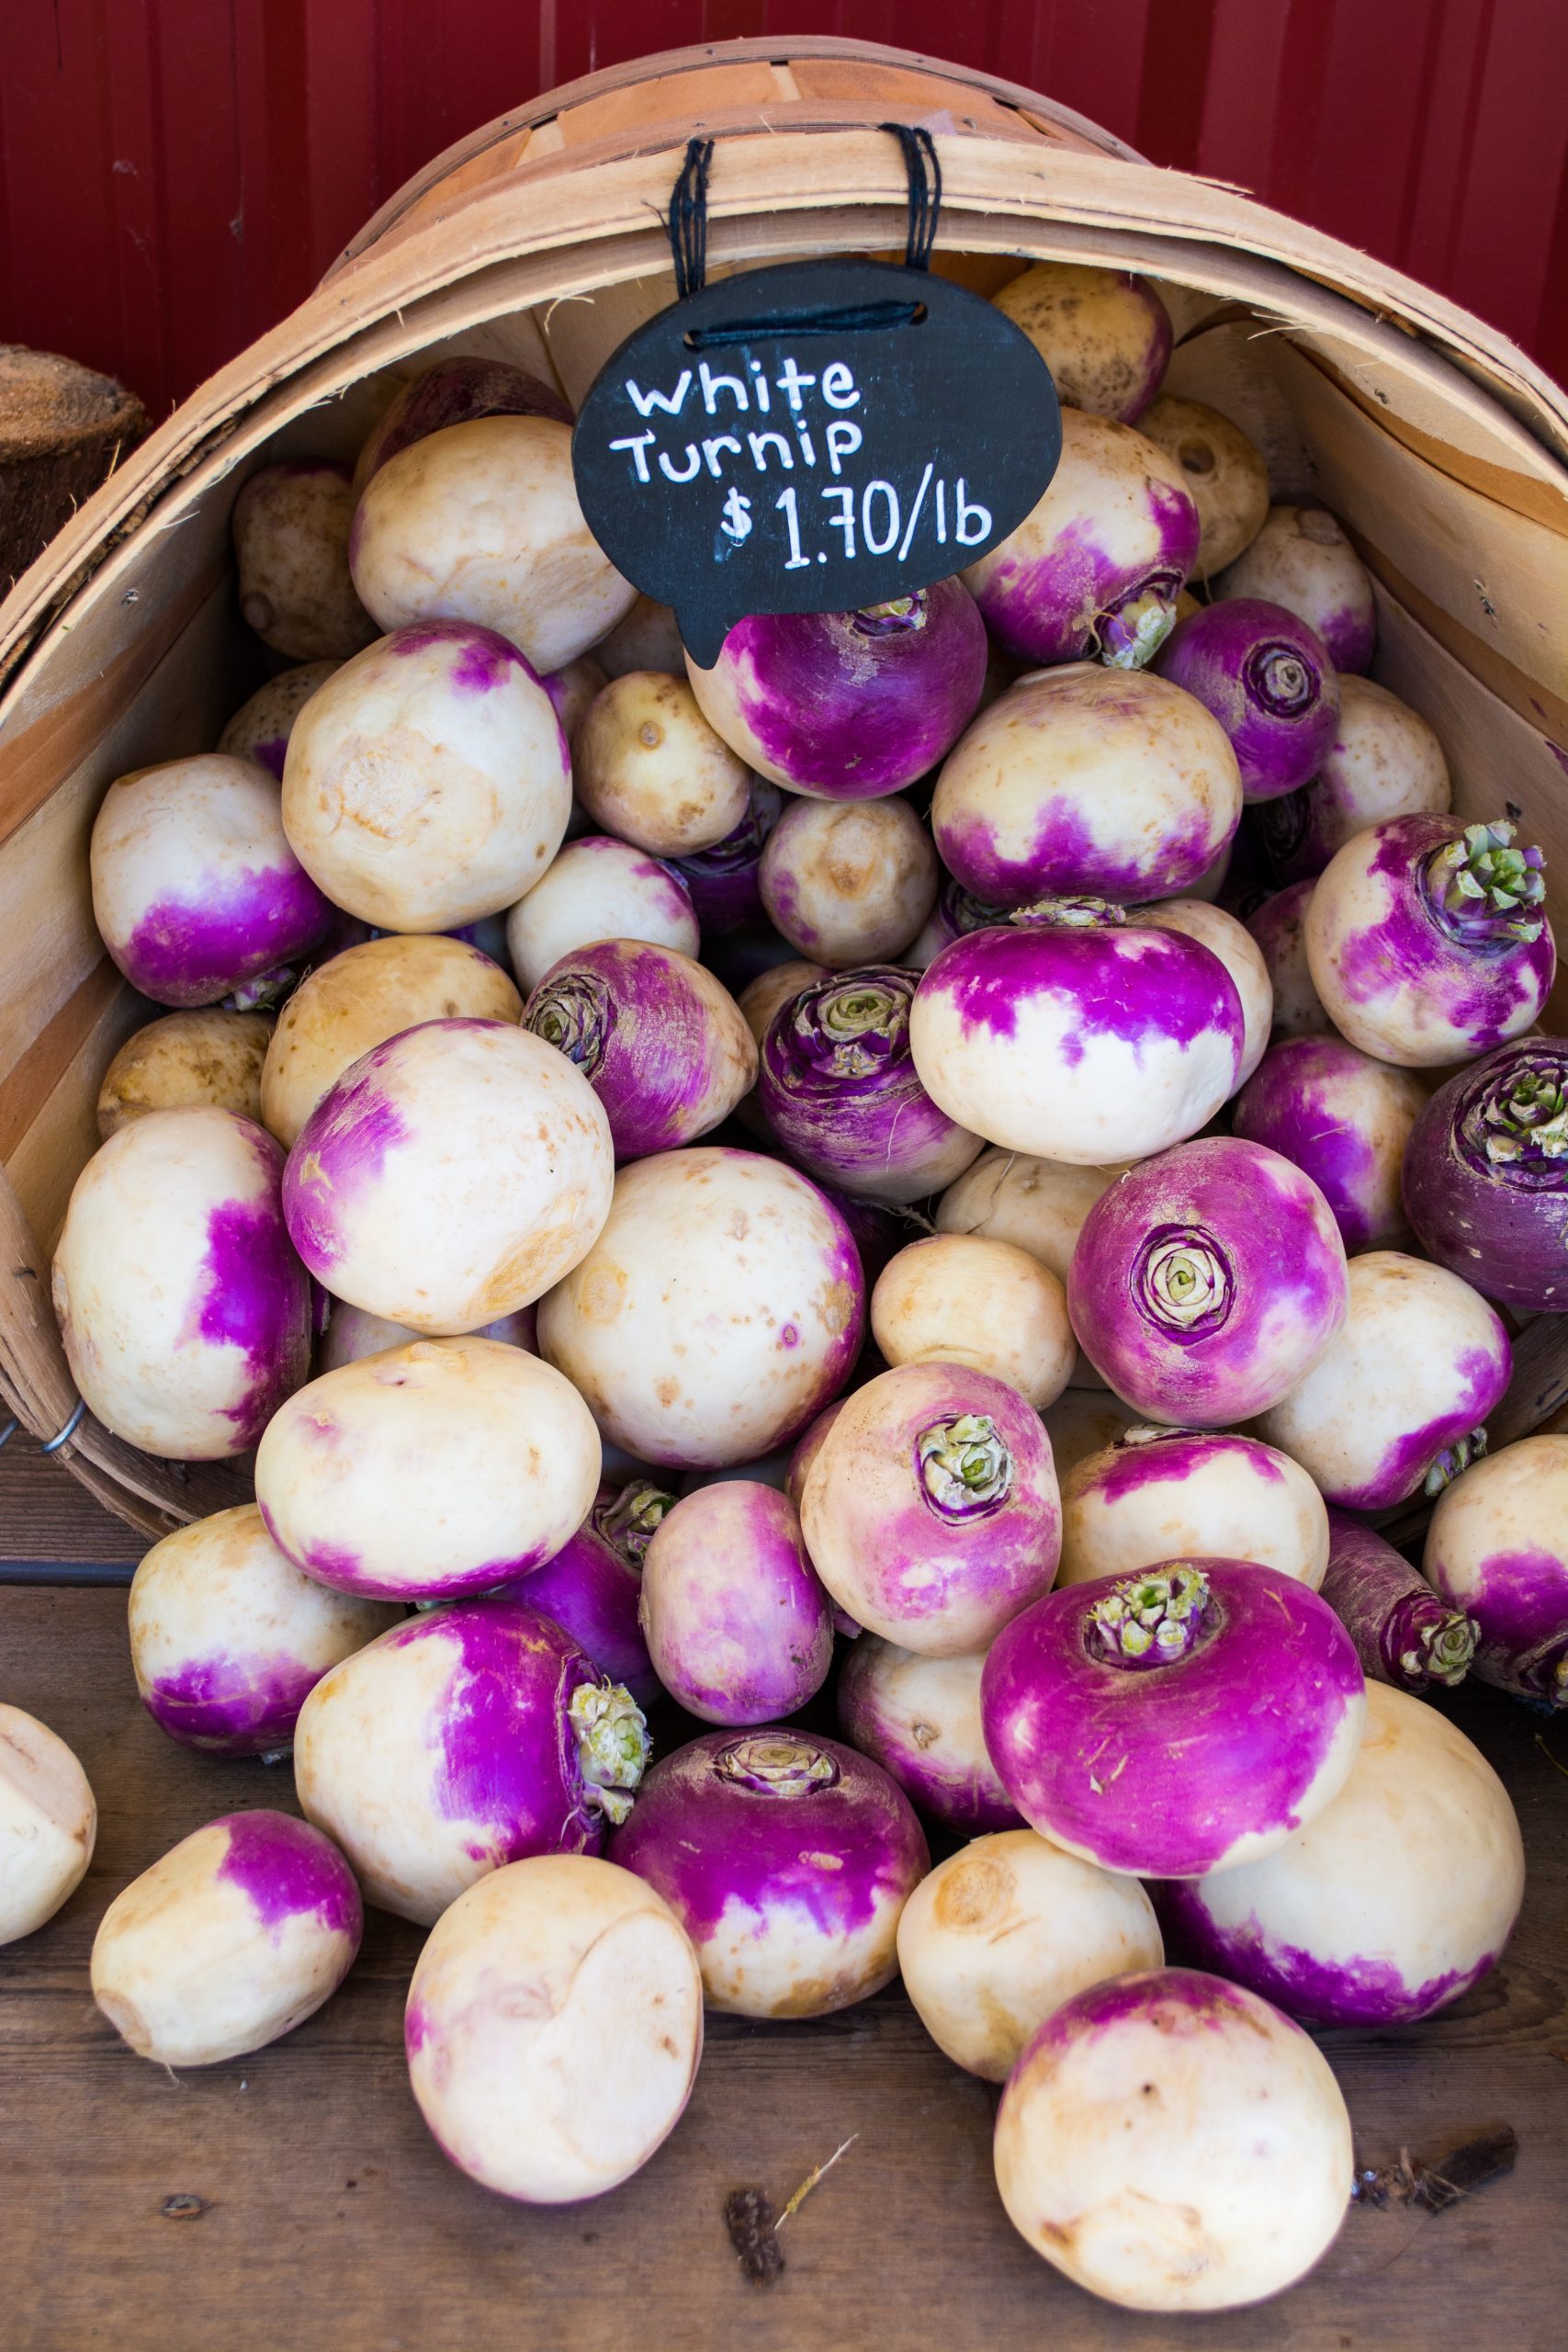 Are Radishes and Turnips The Same? (The Differences And Similarities)